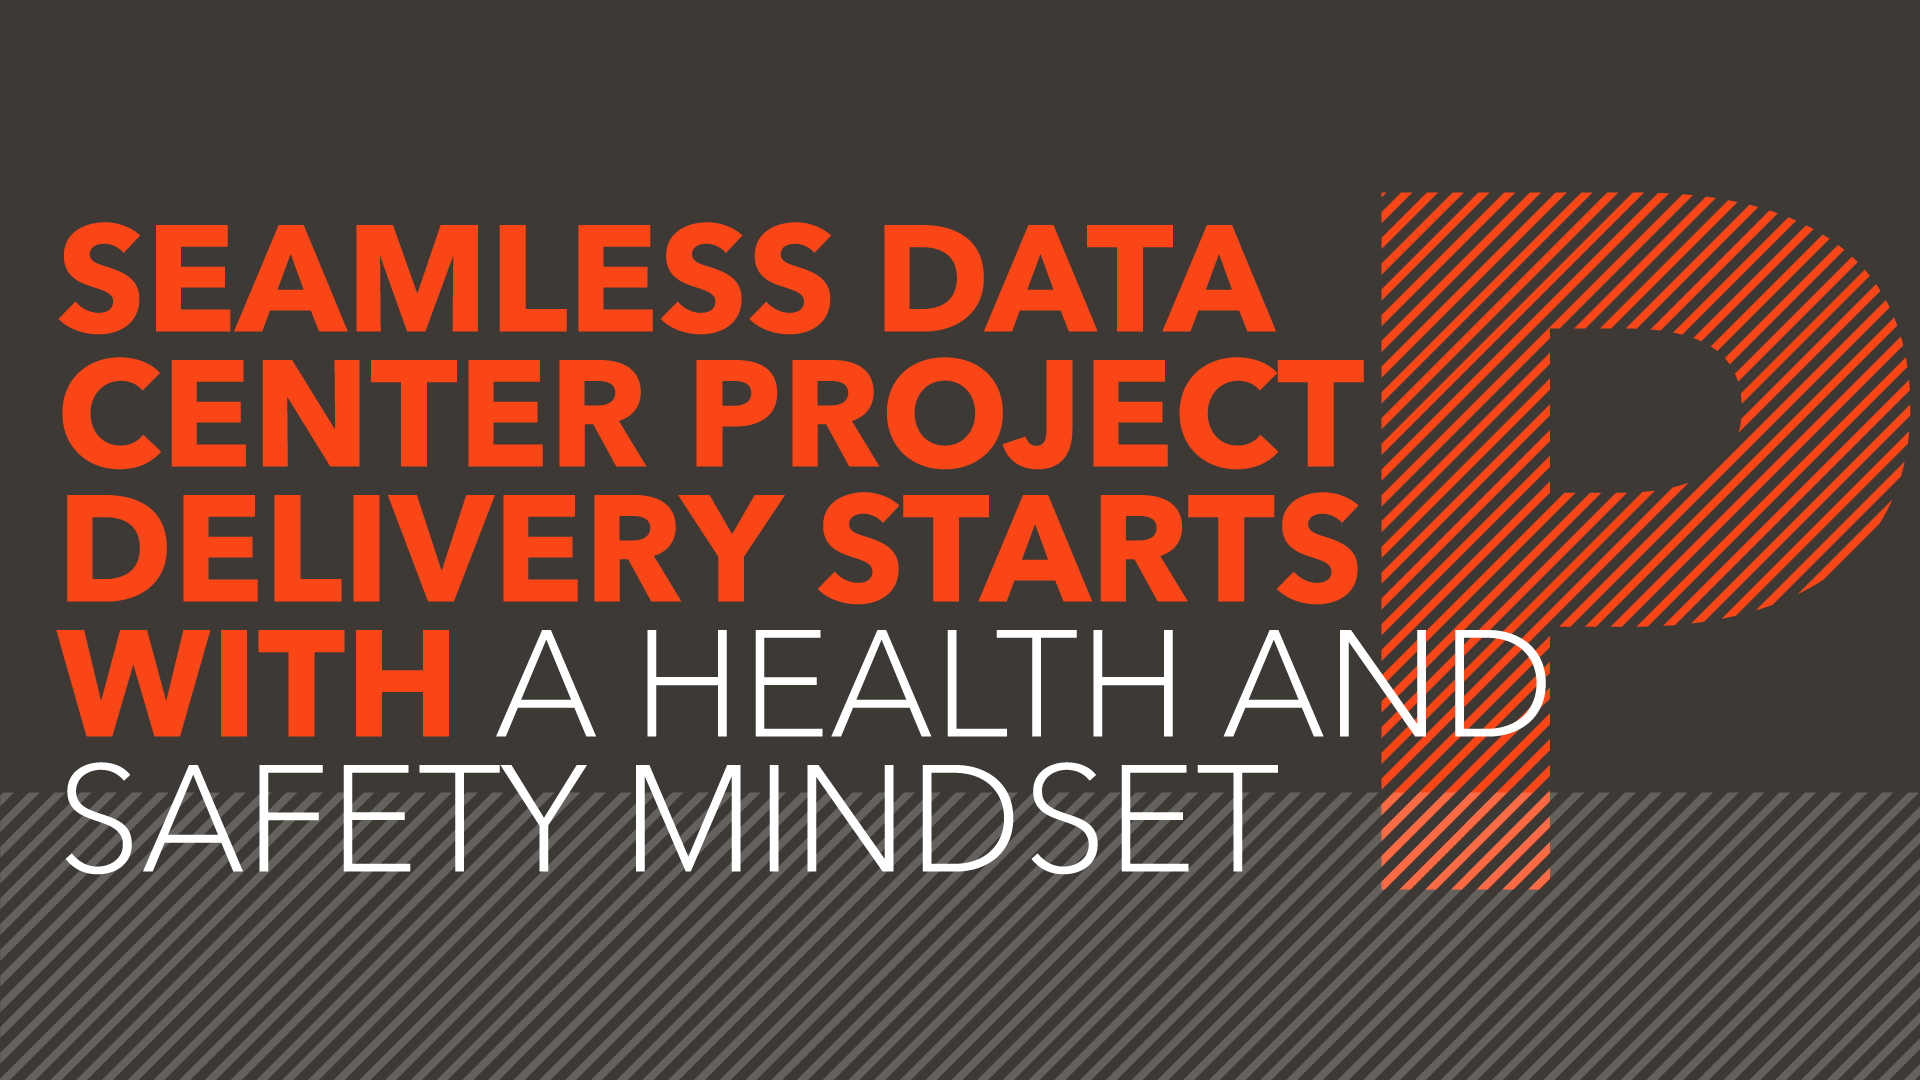 Seamless data center project delivery starts with a health and safety mindset